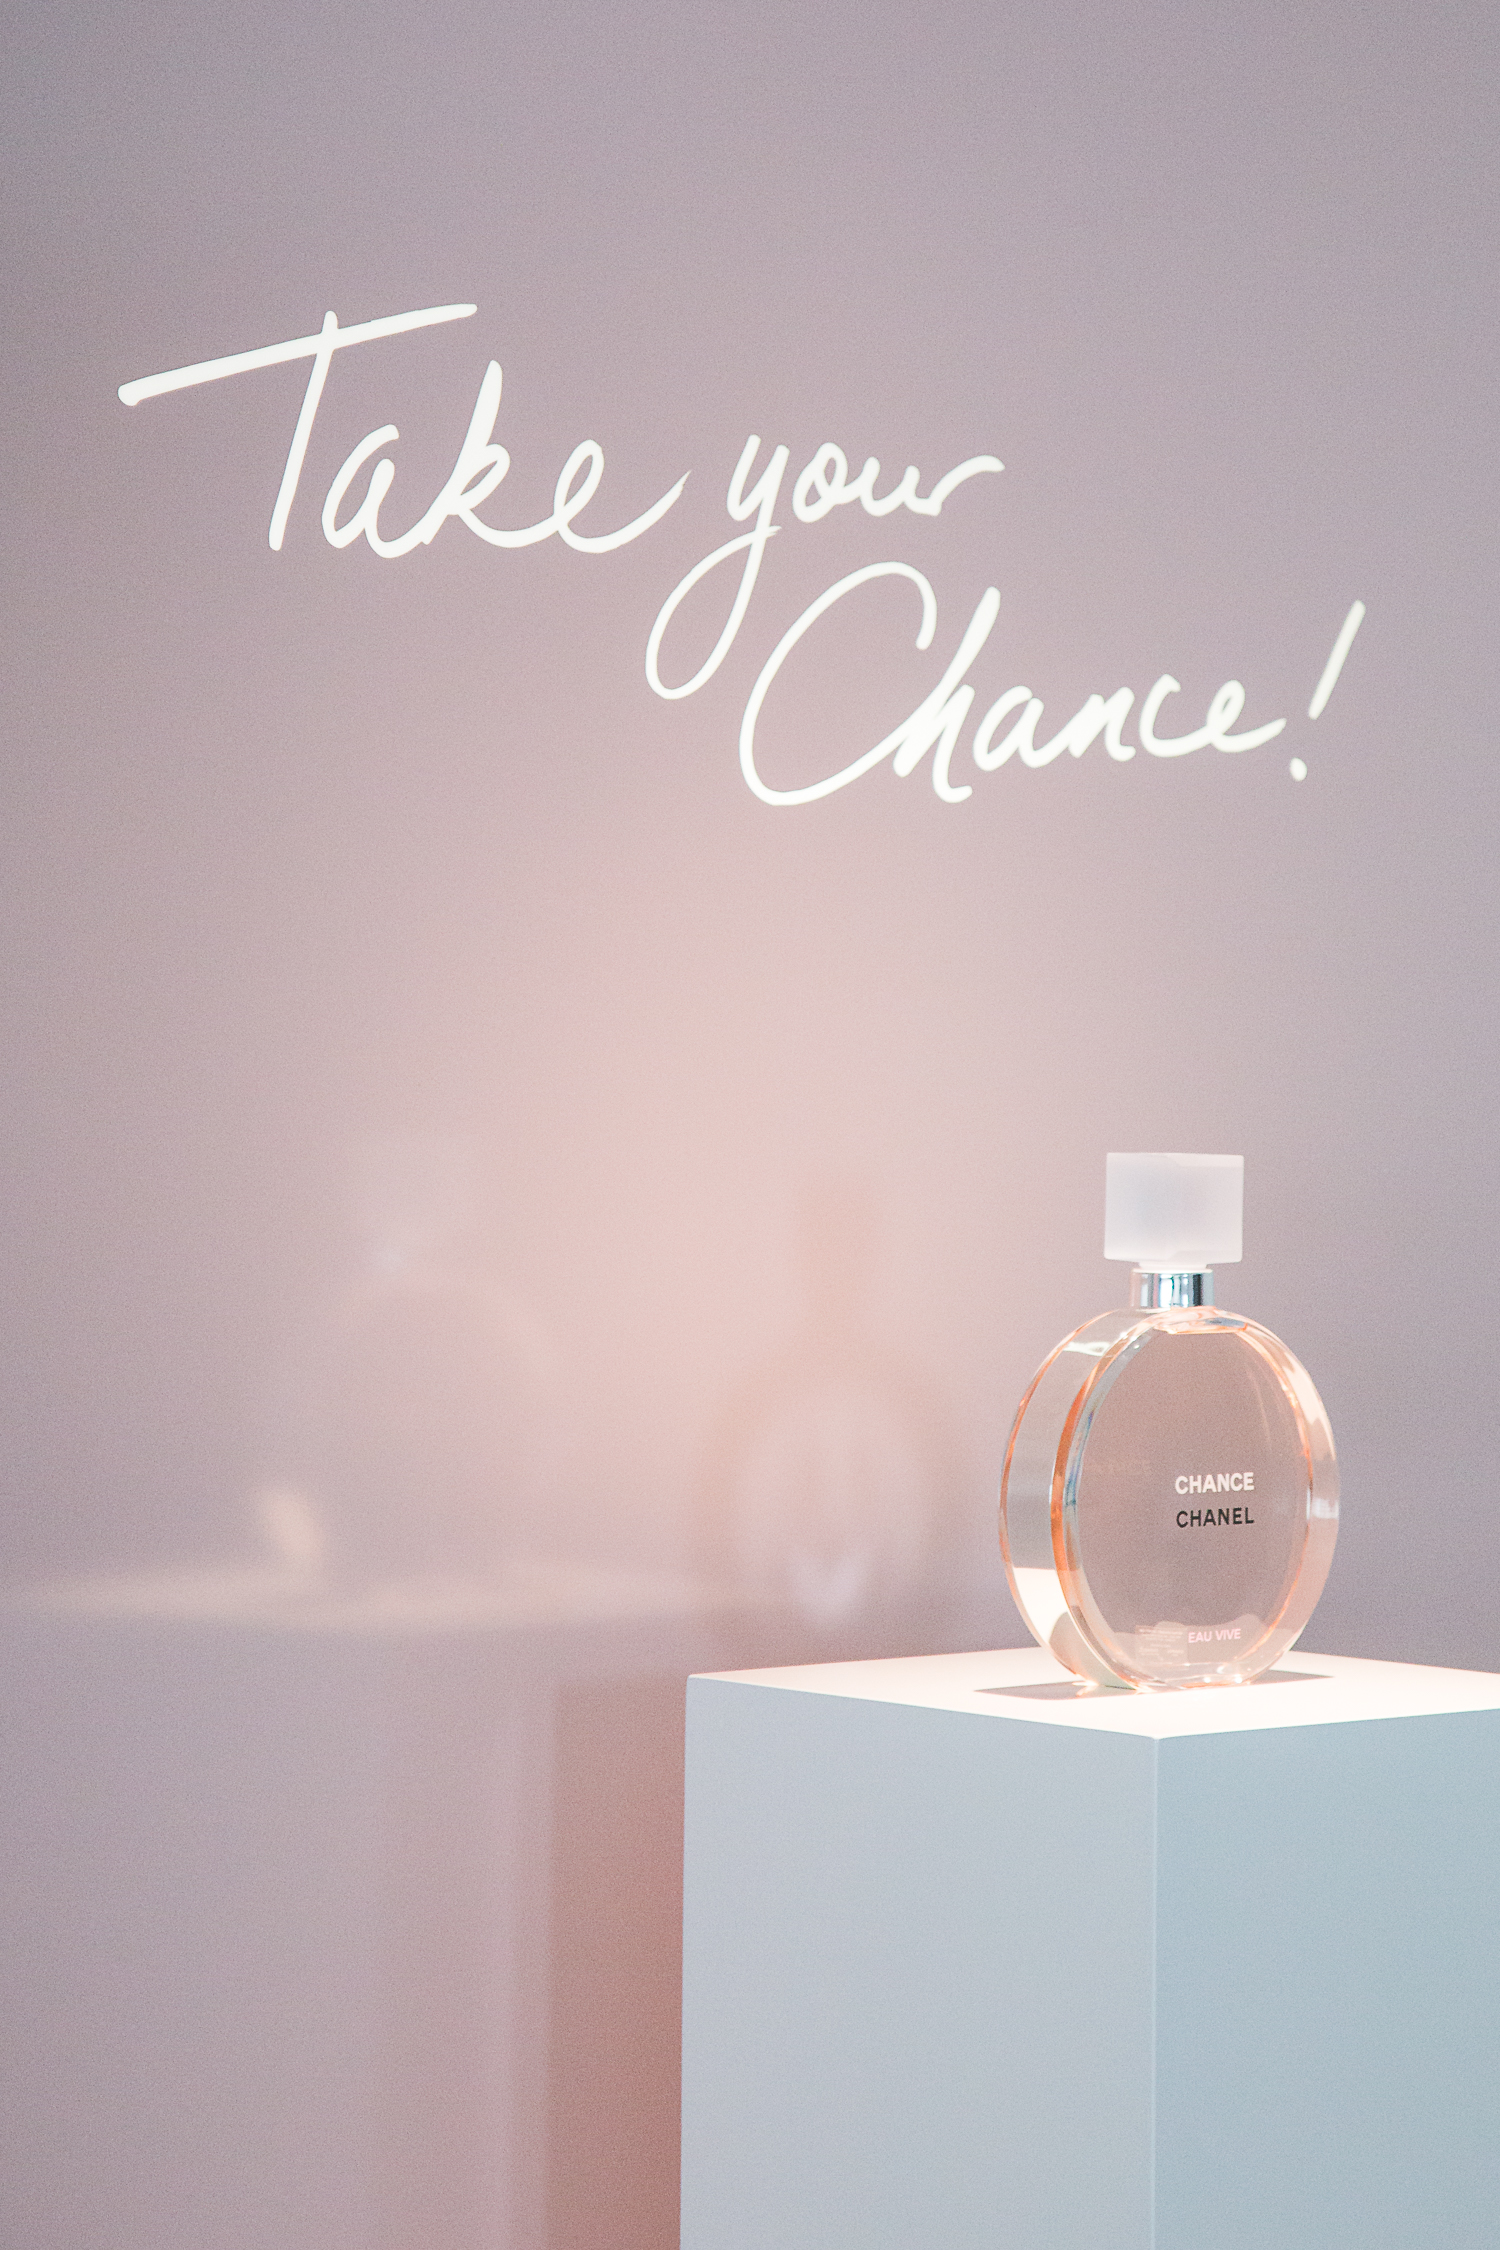 Chanel: Chance Eau Vive | The Daily Dose